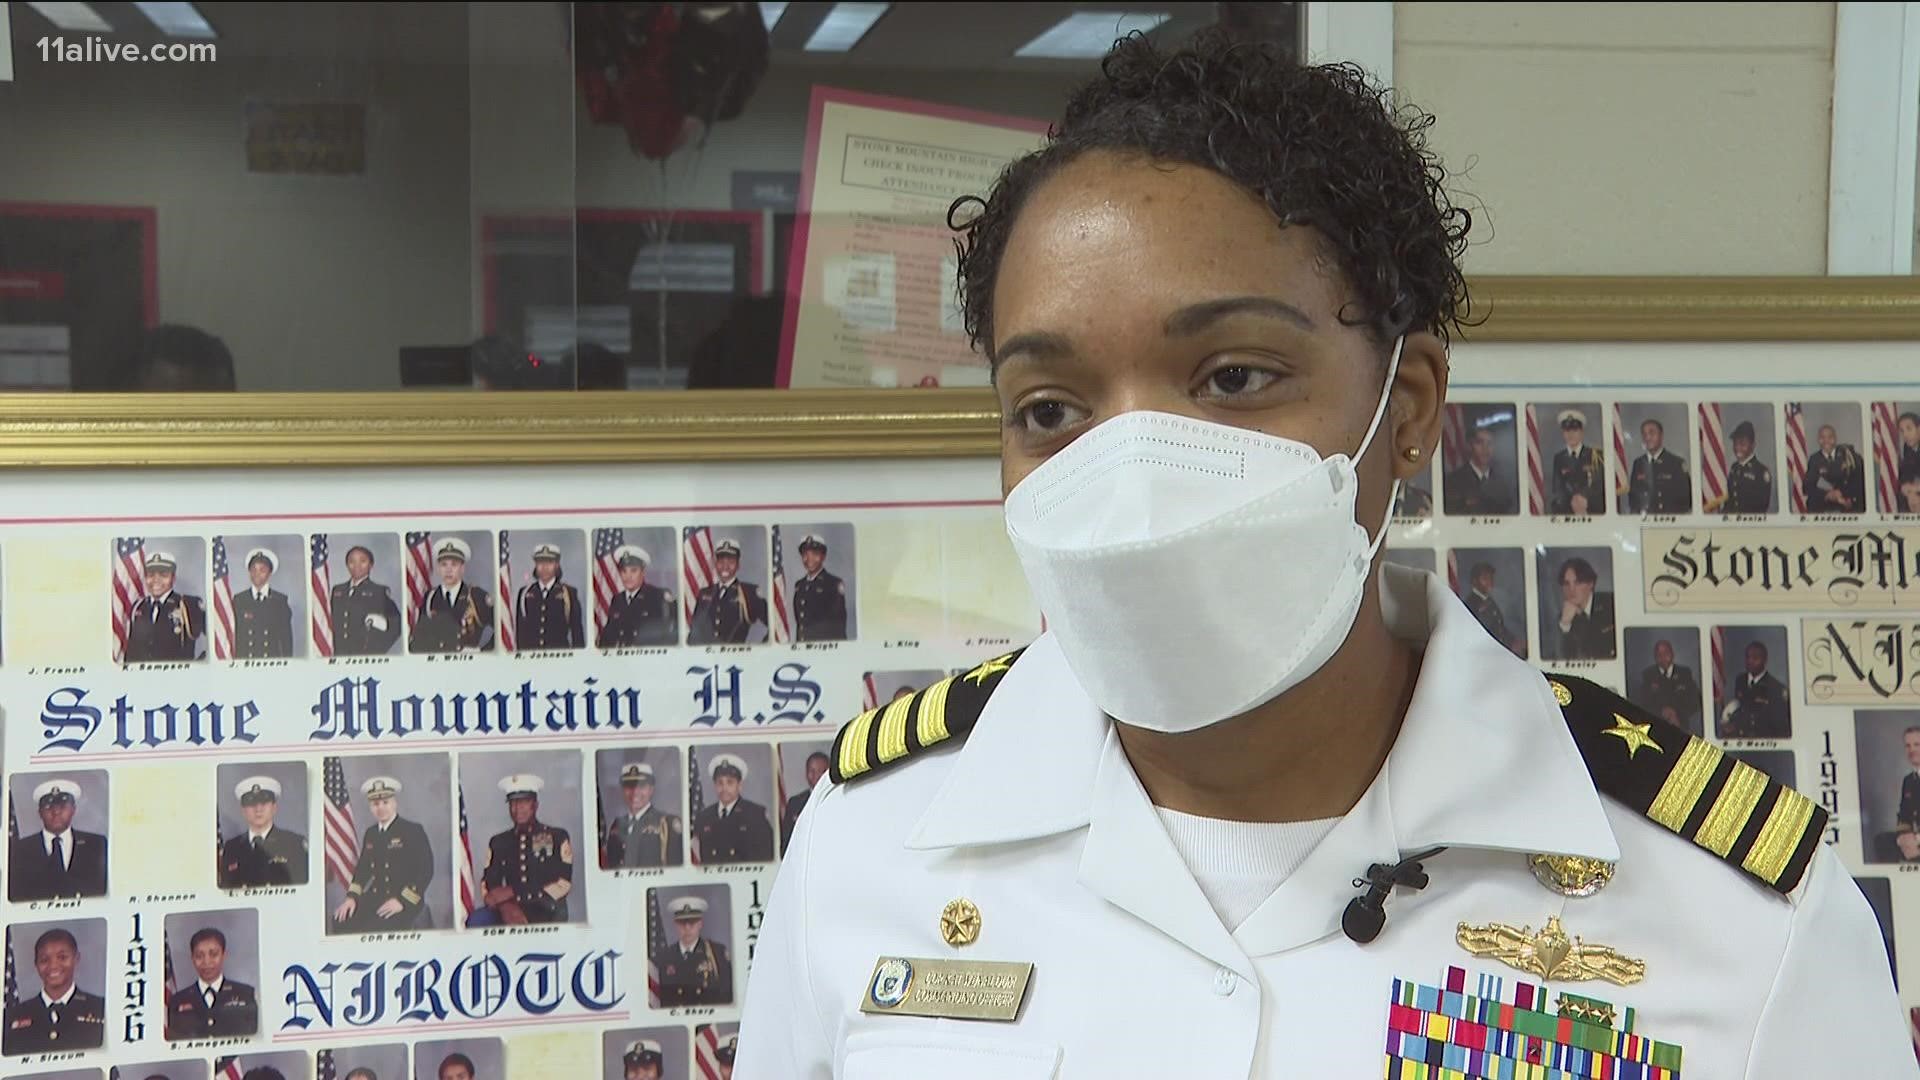 A U.S. Naval officer from metro Atlanta is set for a big homecoming this week.